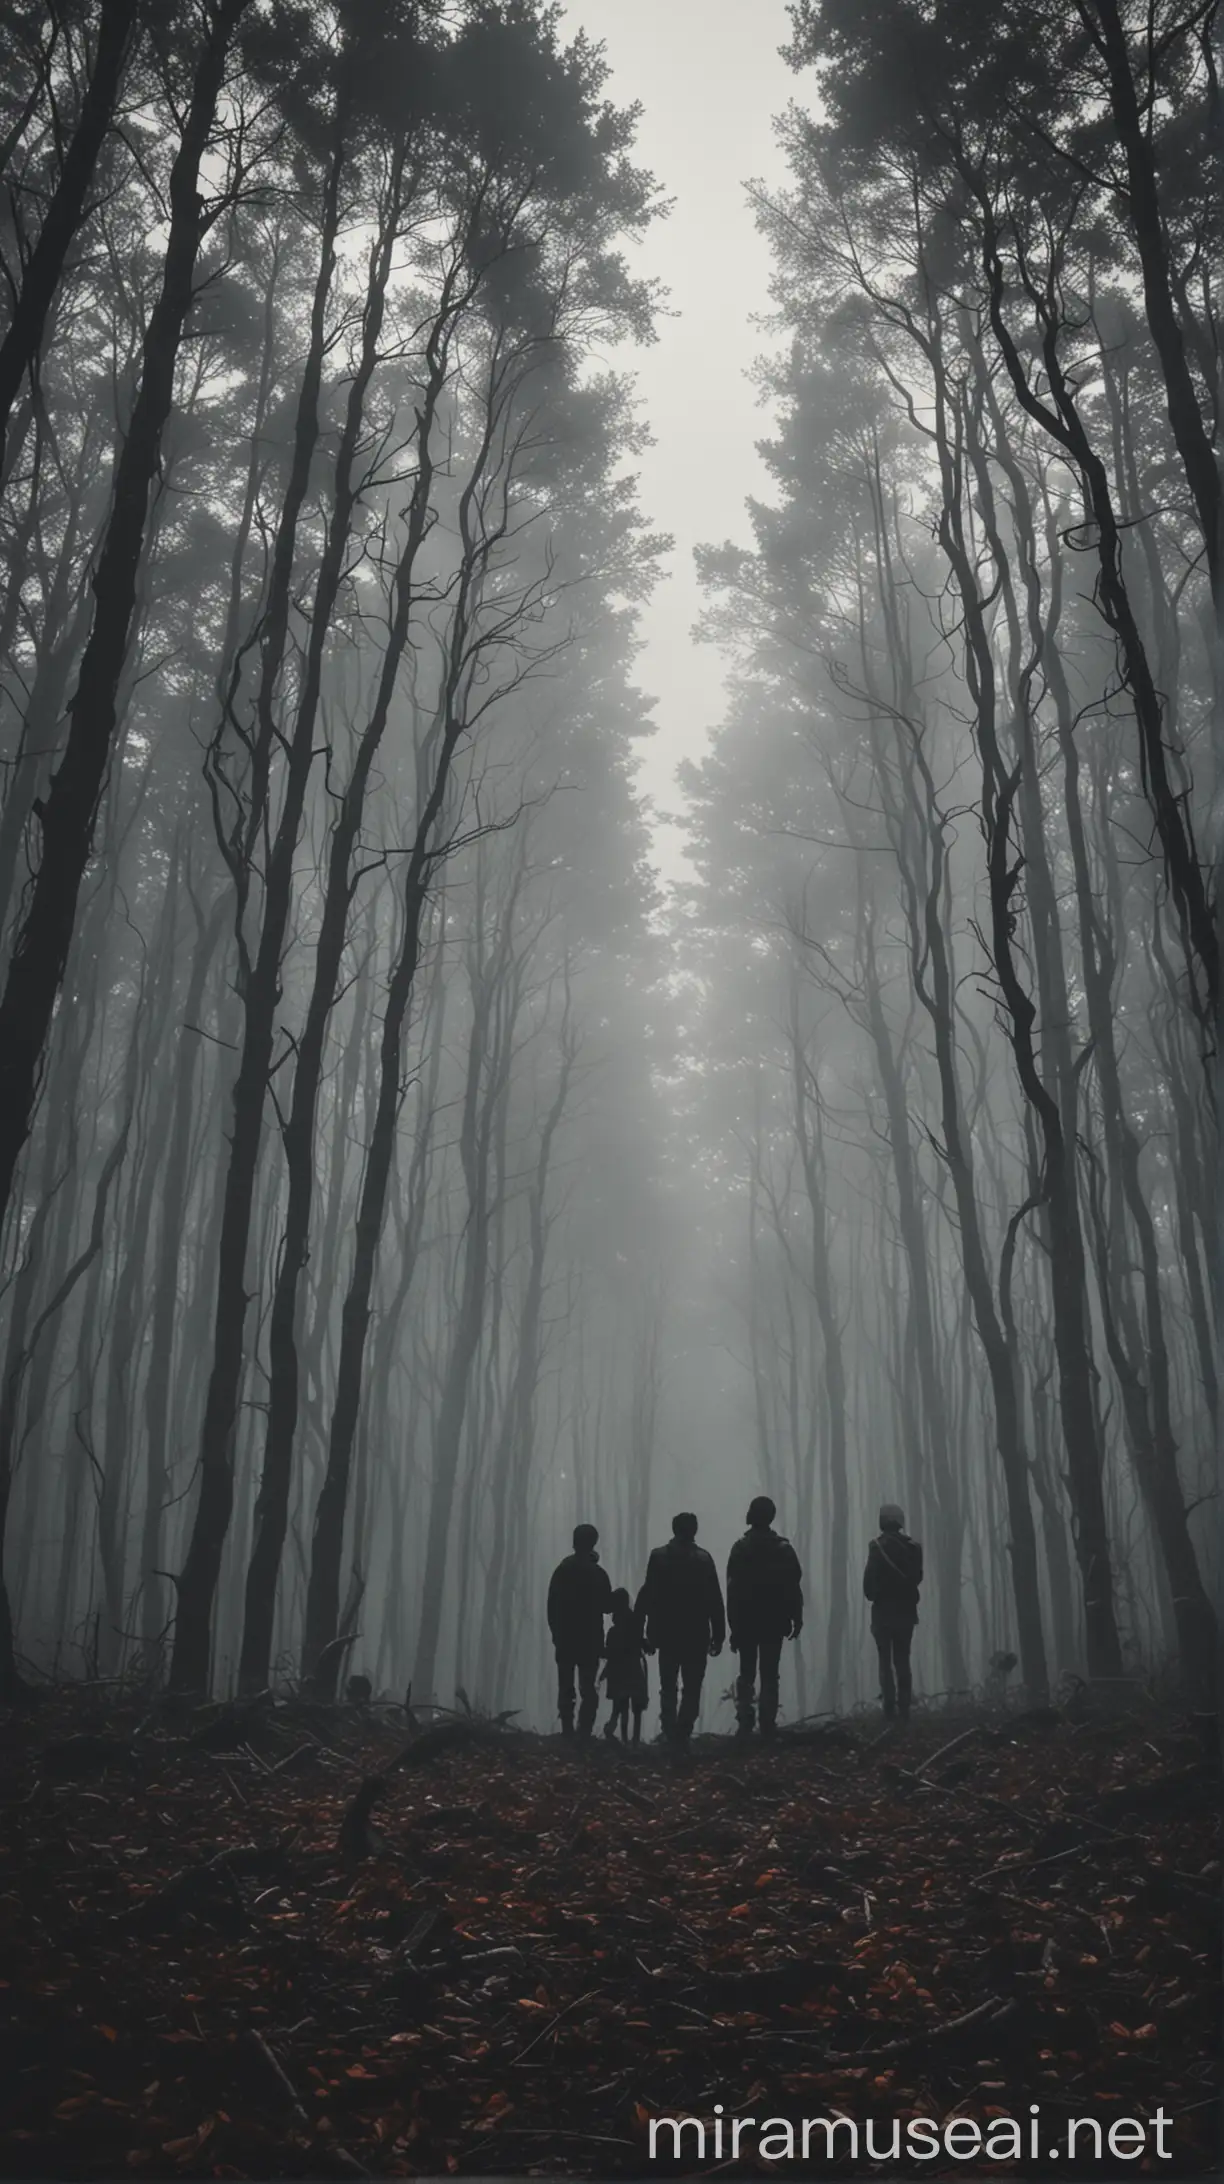 keep the silhouettes of the people but replace the background with a gloomy forest